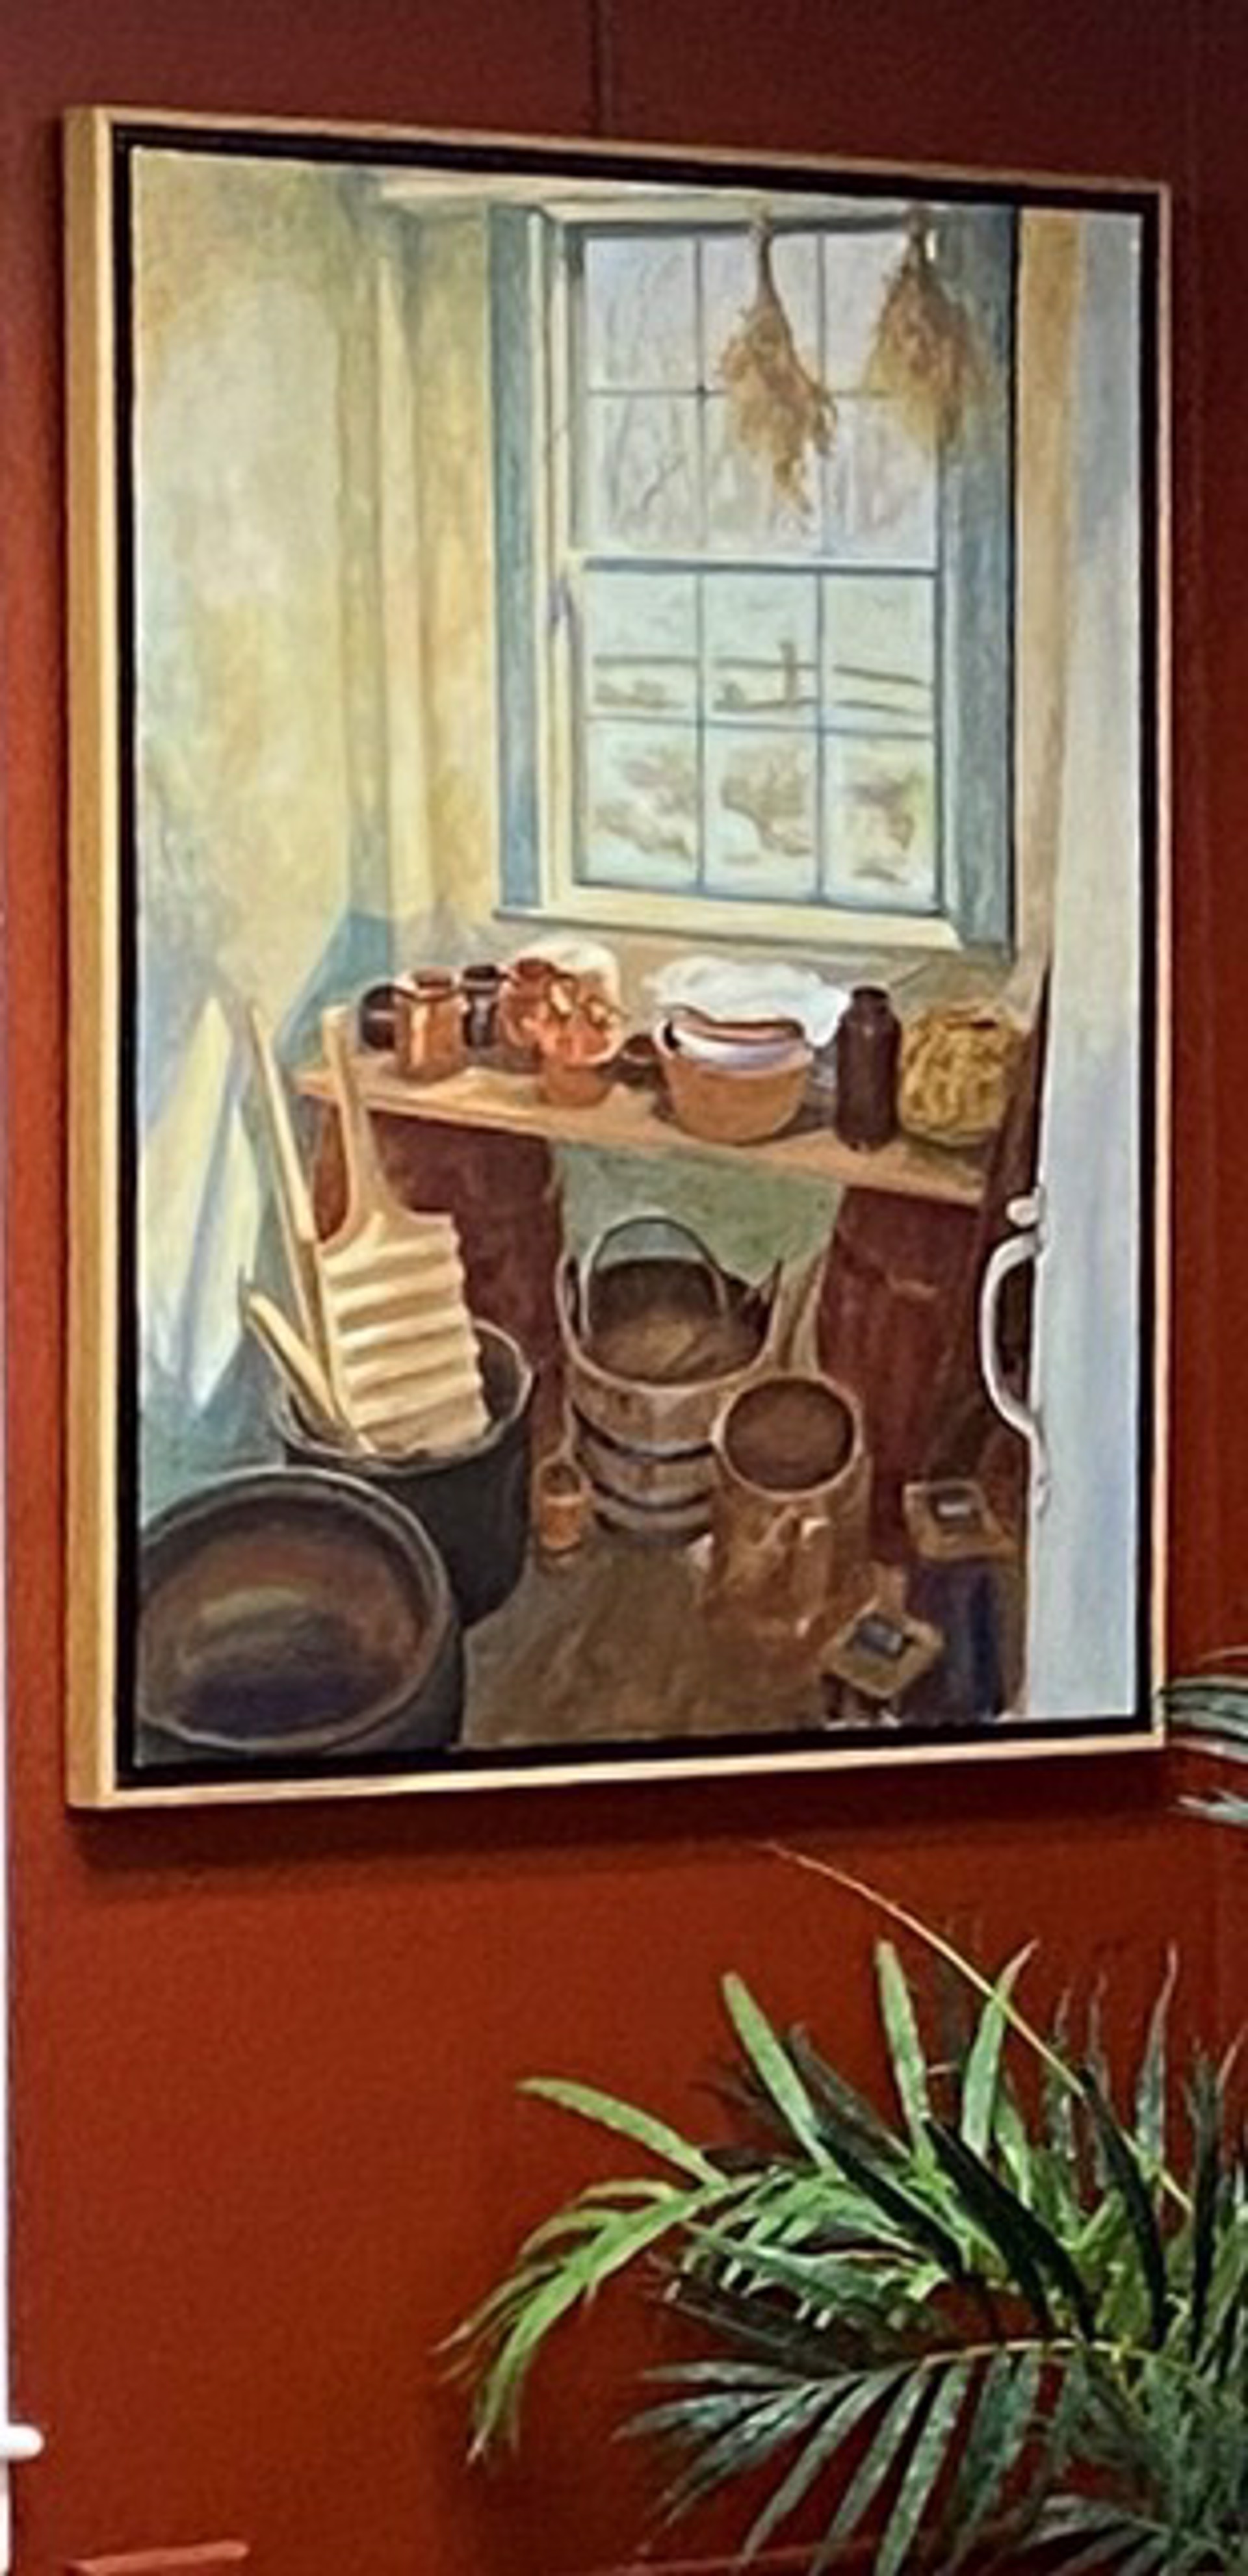 Pantry at Hartwell Tavern by Douglas H. Caves Sr.